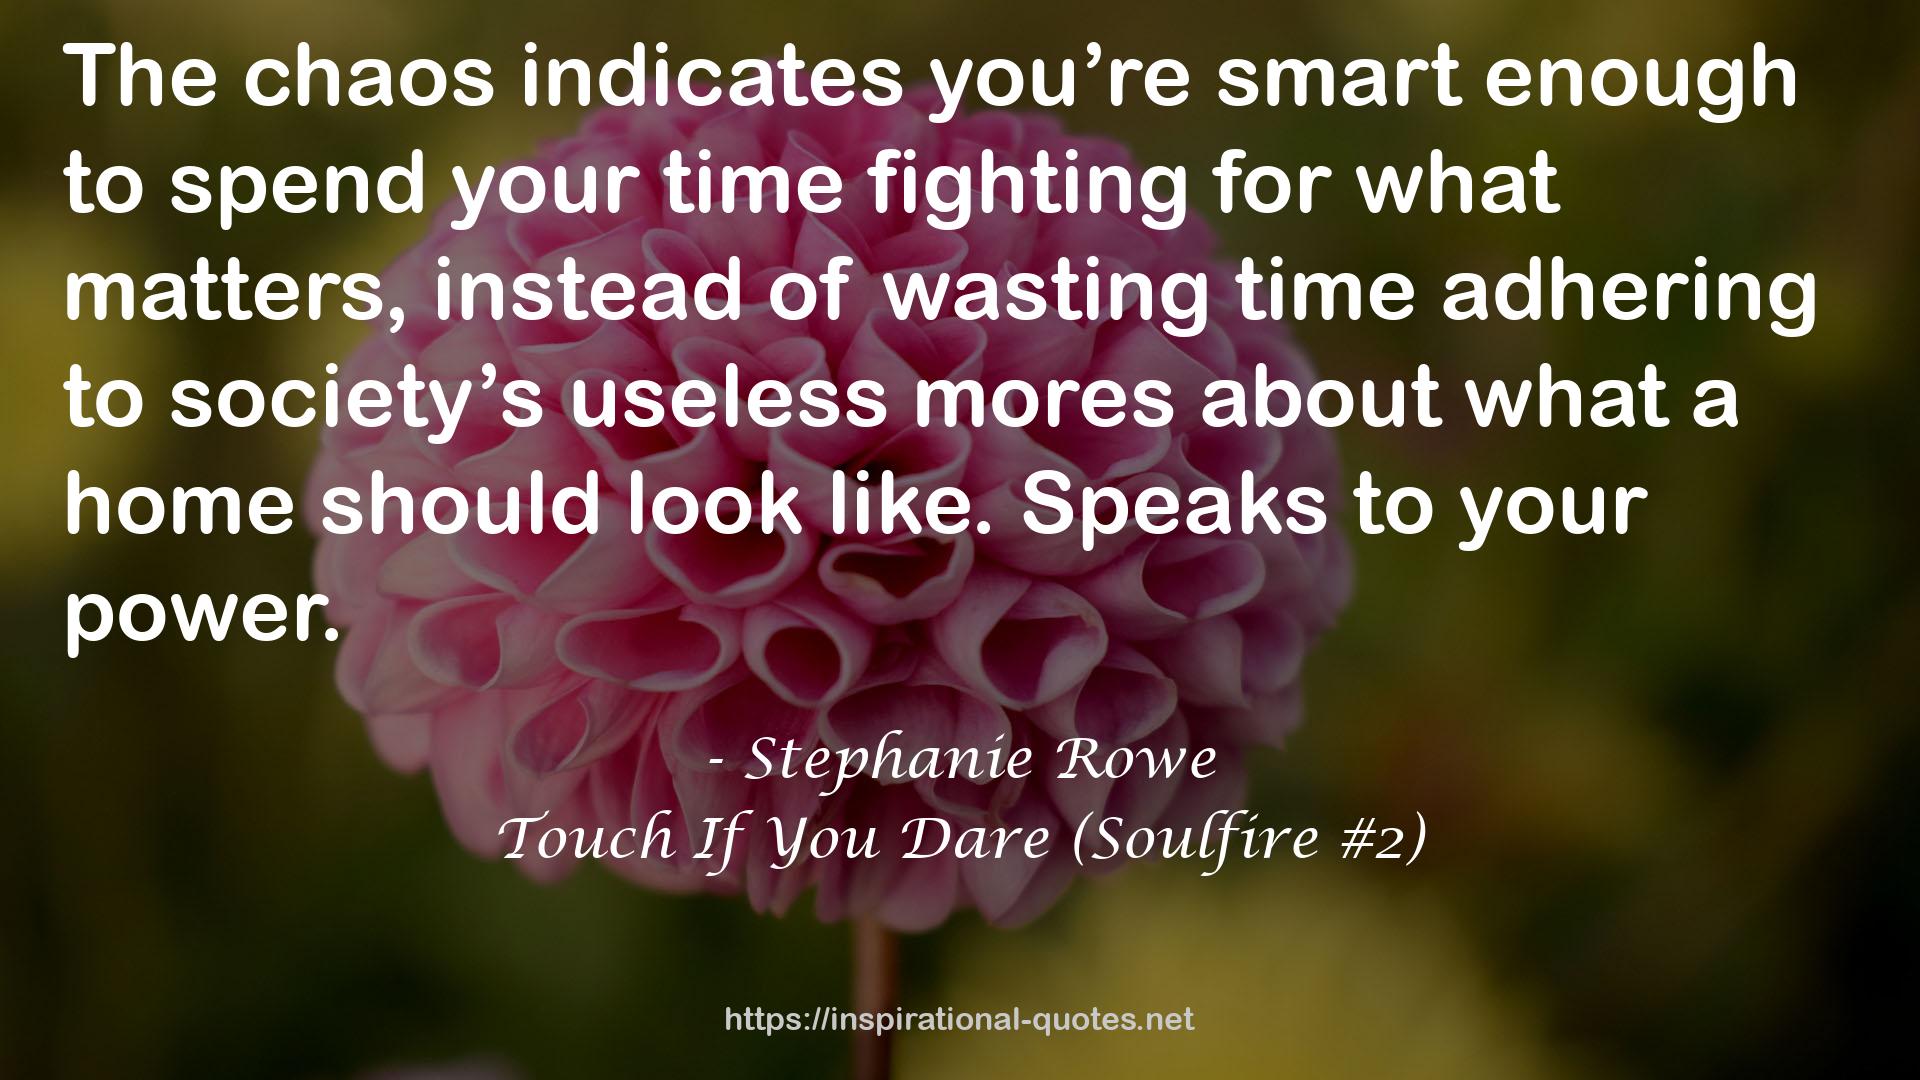 Touch If You Dare (Soulfire #2) QUOTES